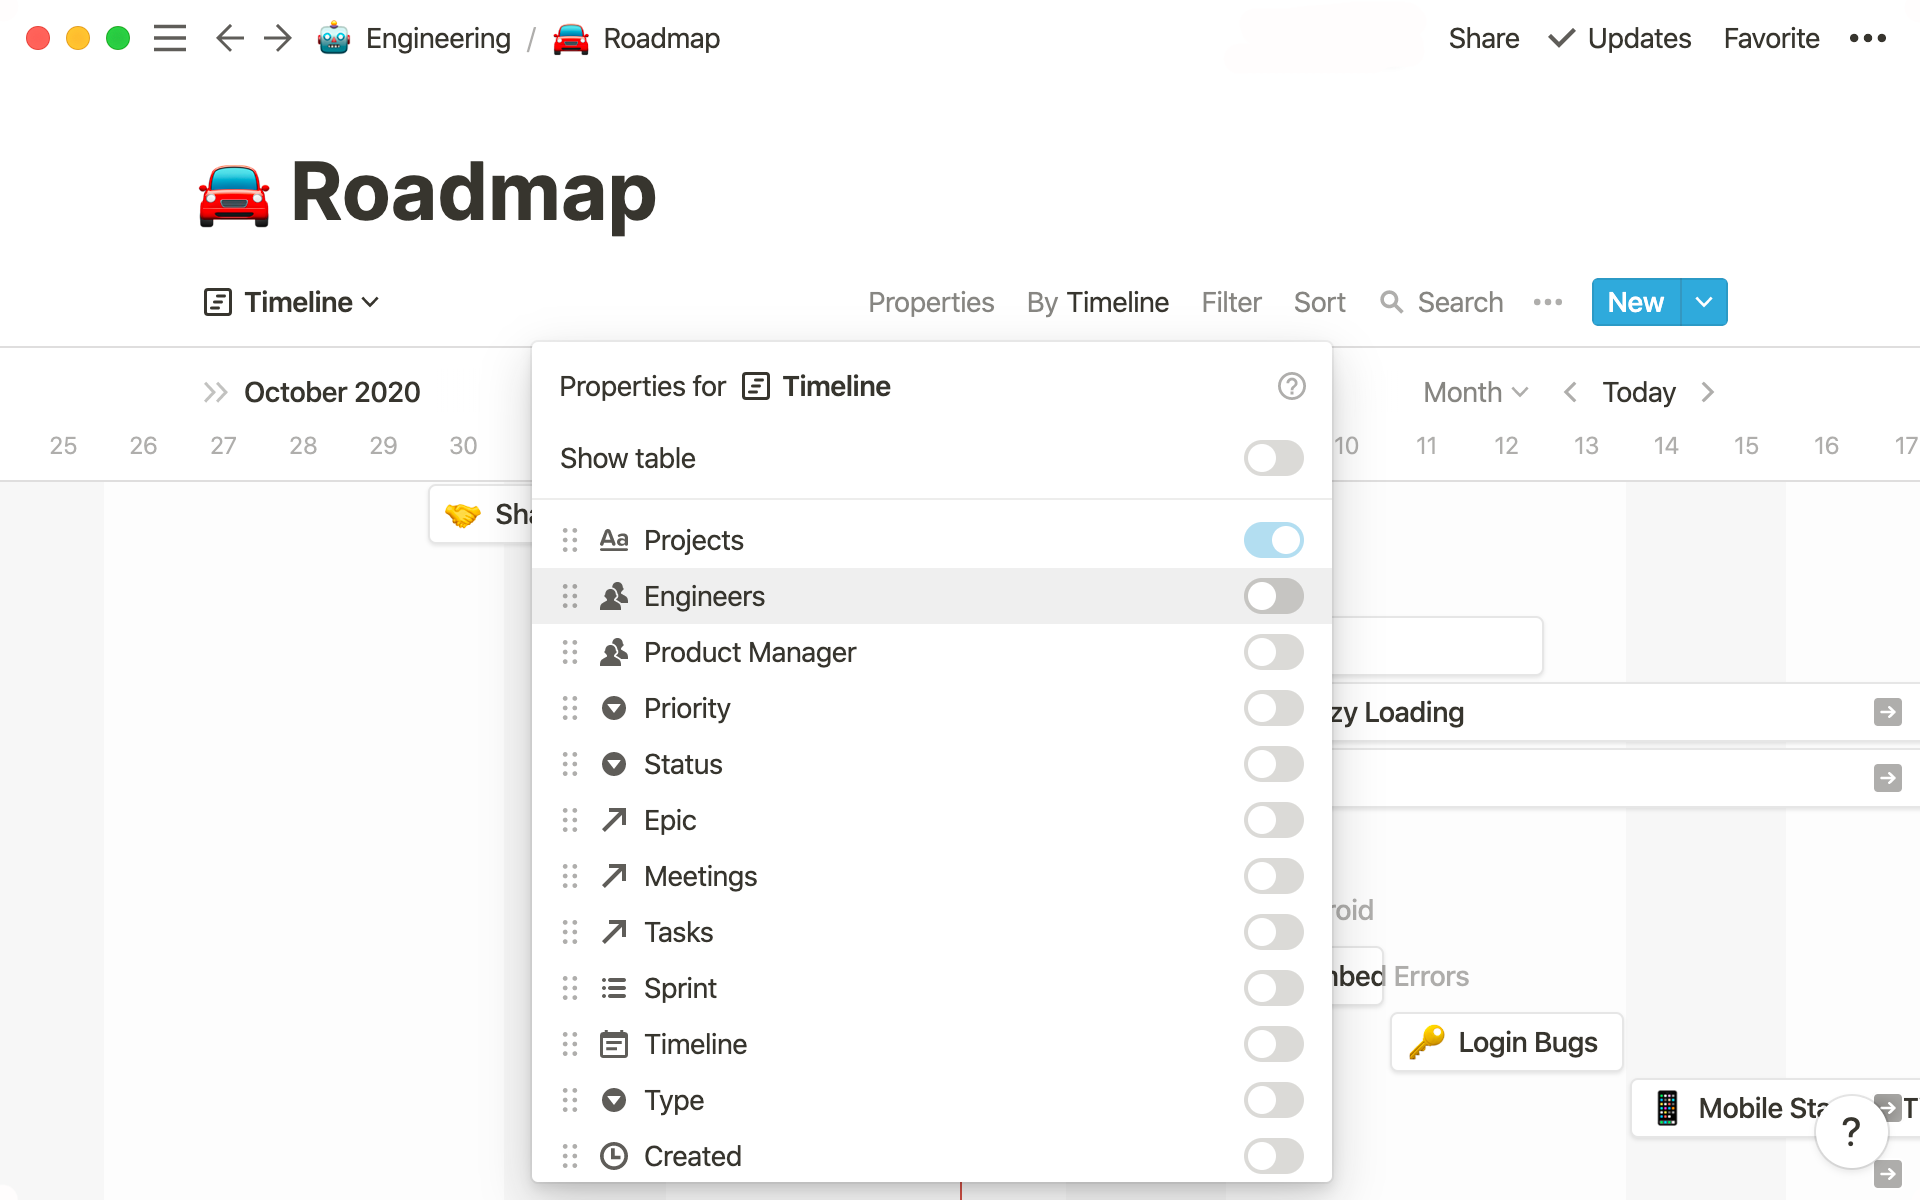 Timeline view unlocks high-output planning for your team